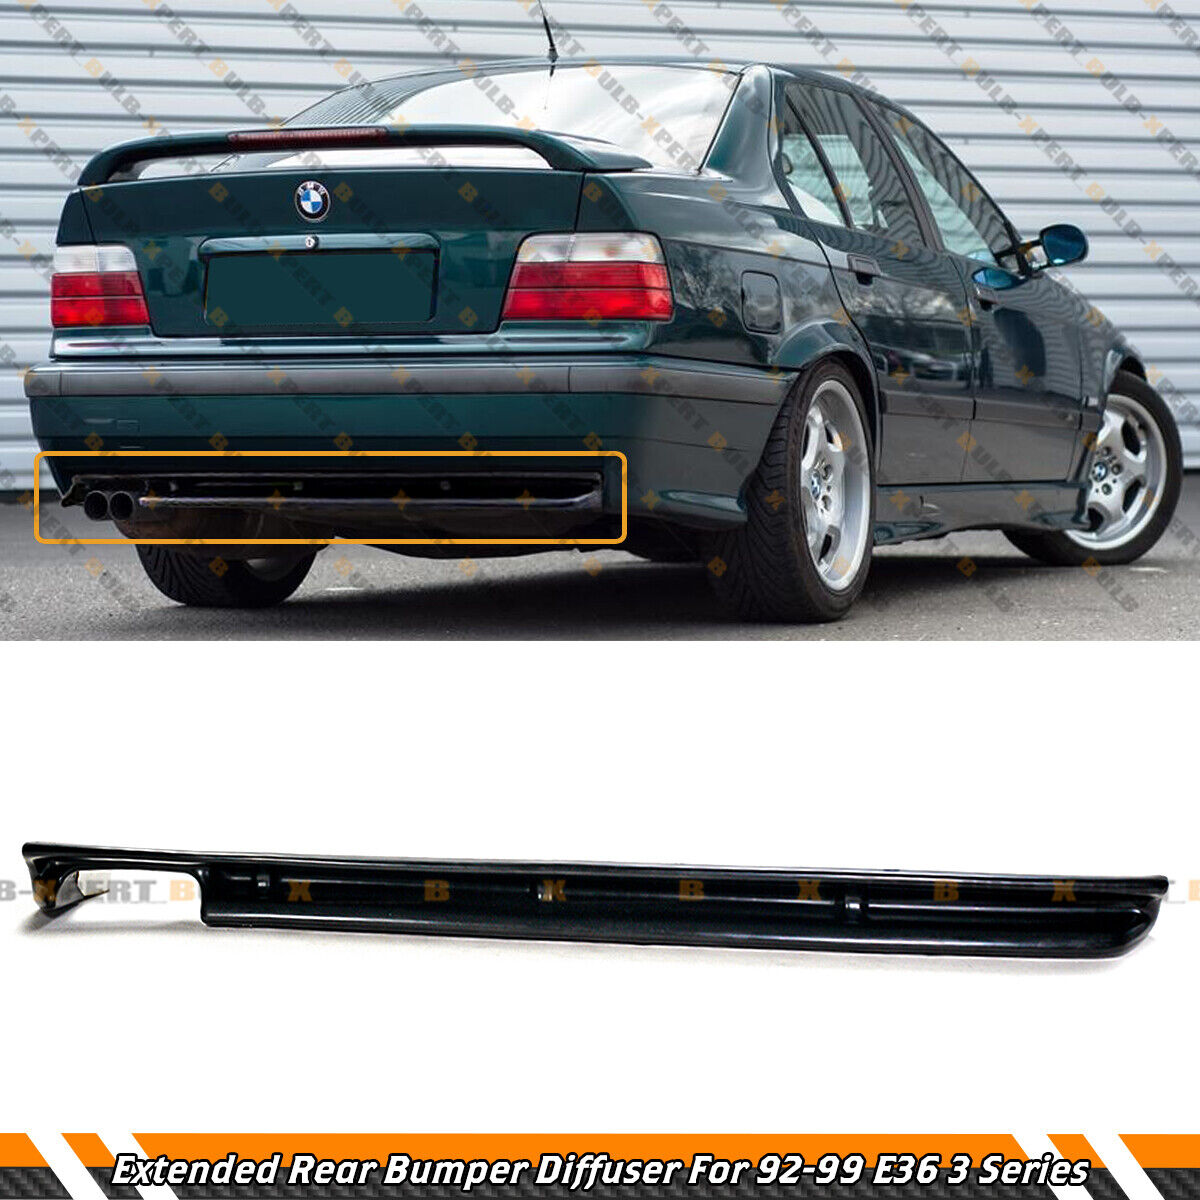 M3 STYLE UNPAINTED BLACK ADD-ON REAR BUMPER DIFFUSER FOR 92-99 BMW E36 3 SERIES